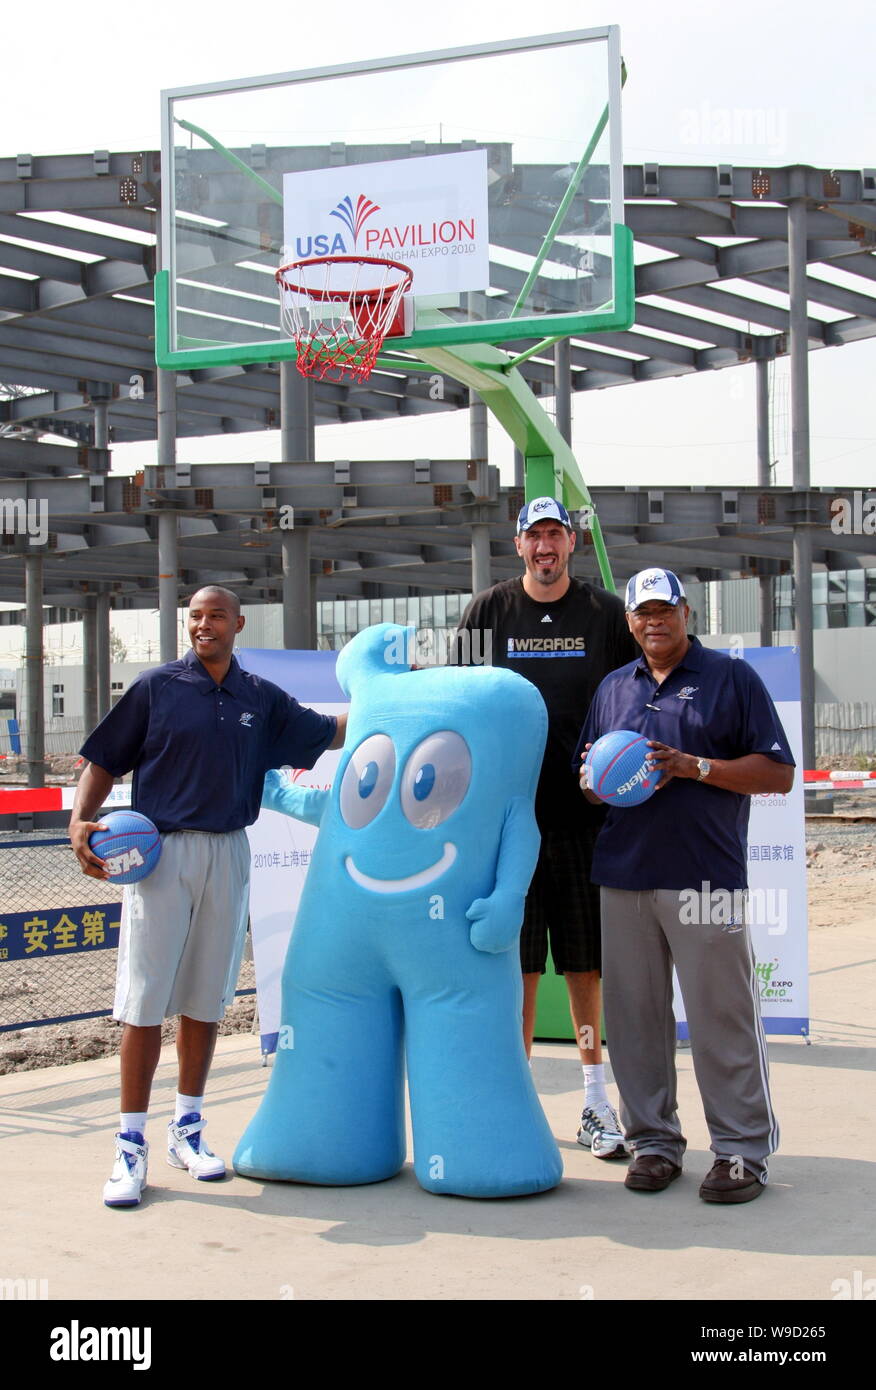 (From left) NBA player Caron Butler of the Washington Wizards, former Bullets player Gheorghe Muresan and NBA Hall of Fame center Wes Unseld pose with Stock Photo